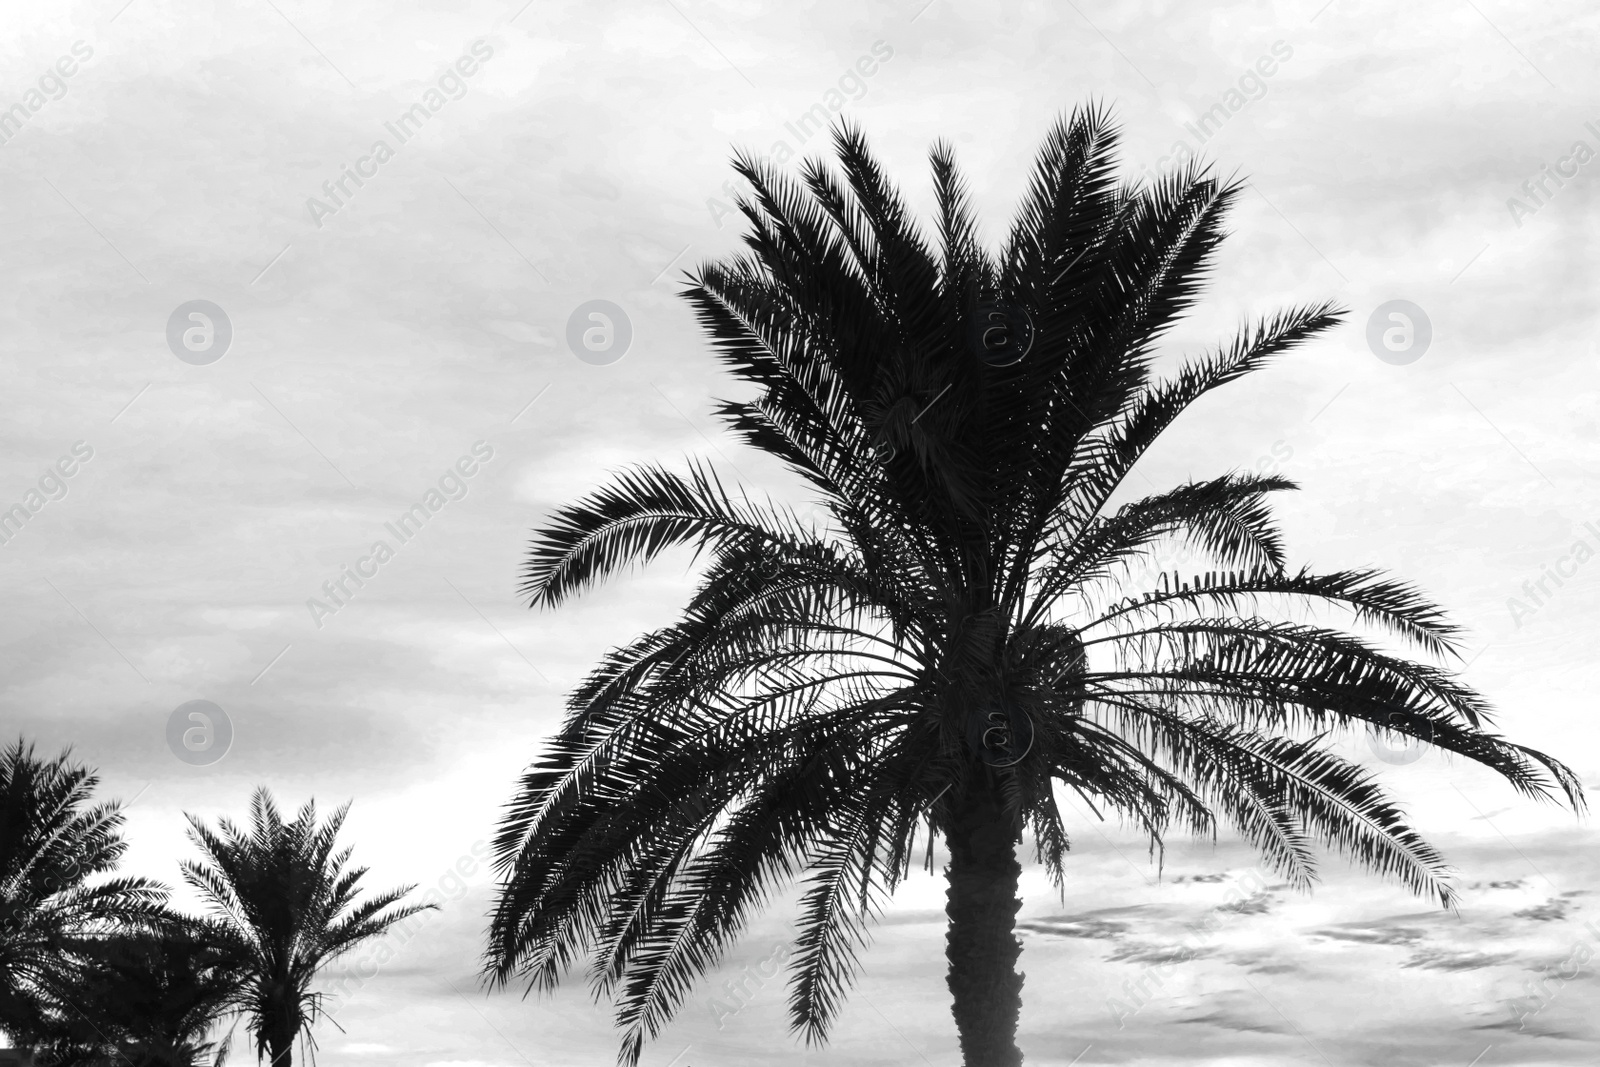 Image of Tropical palms and beautiful sky on background. Black and white tone